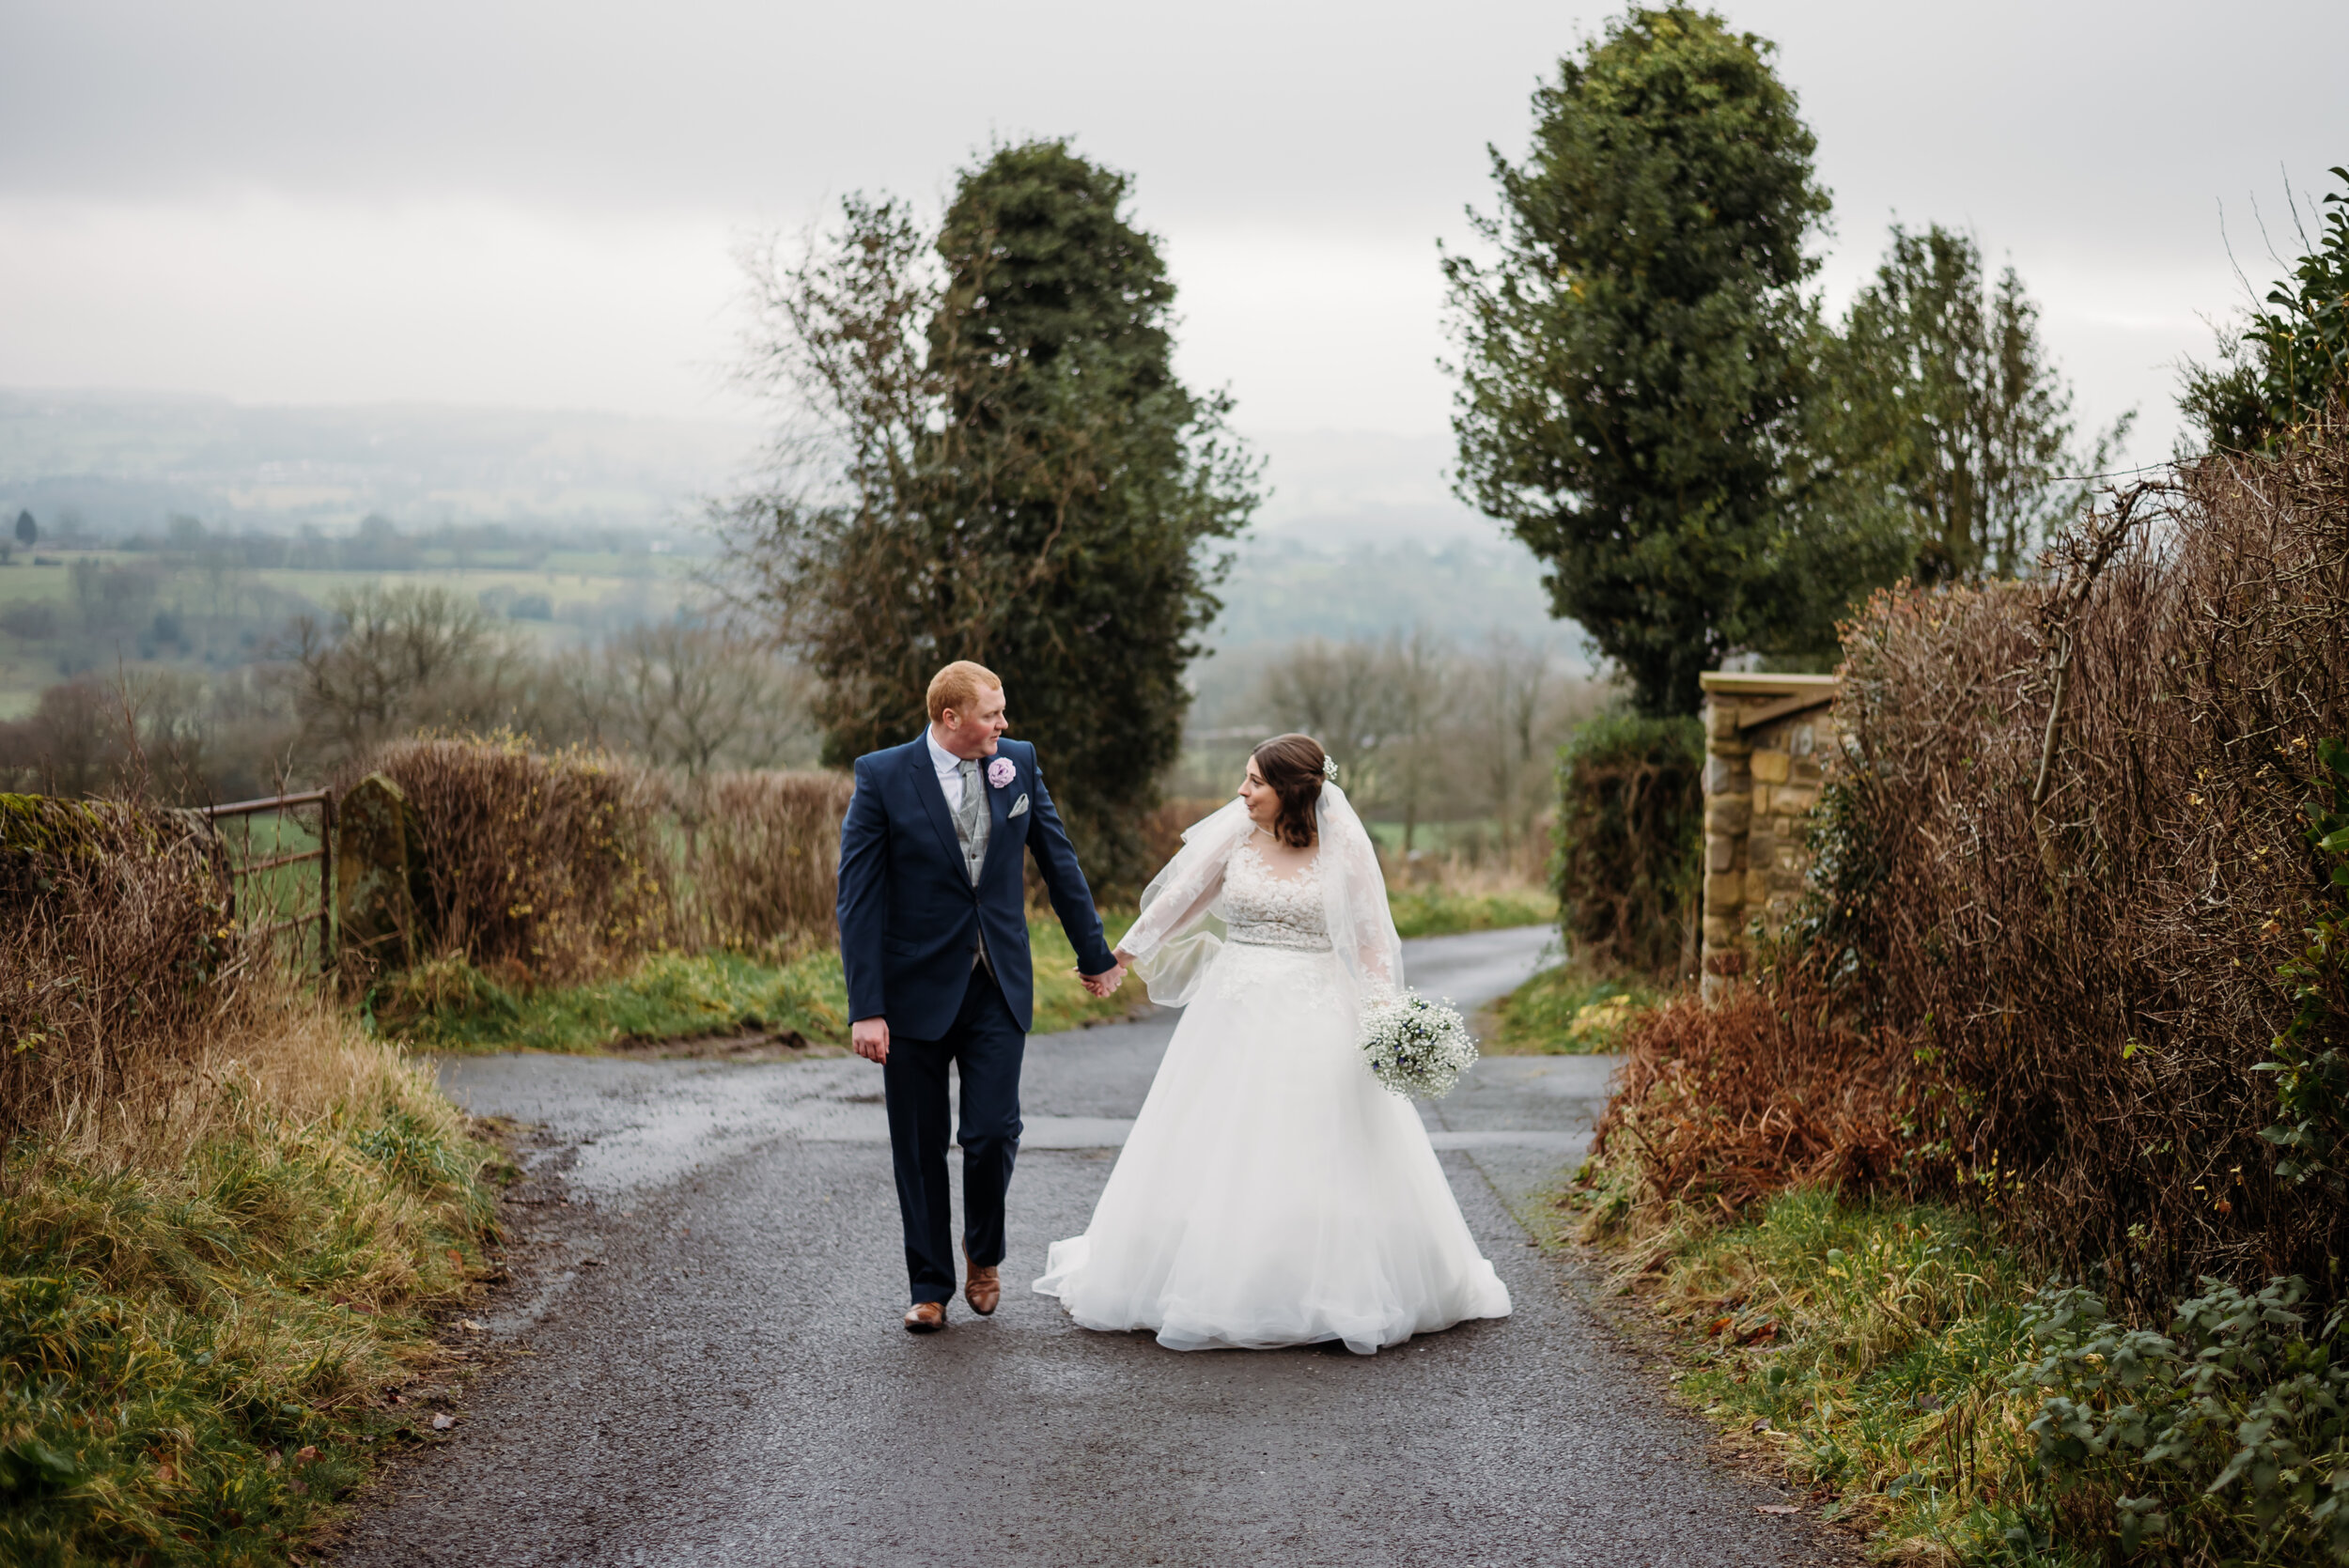 Bride and groom walking on a lane